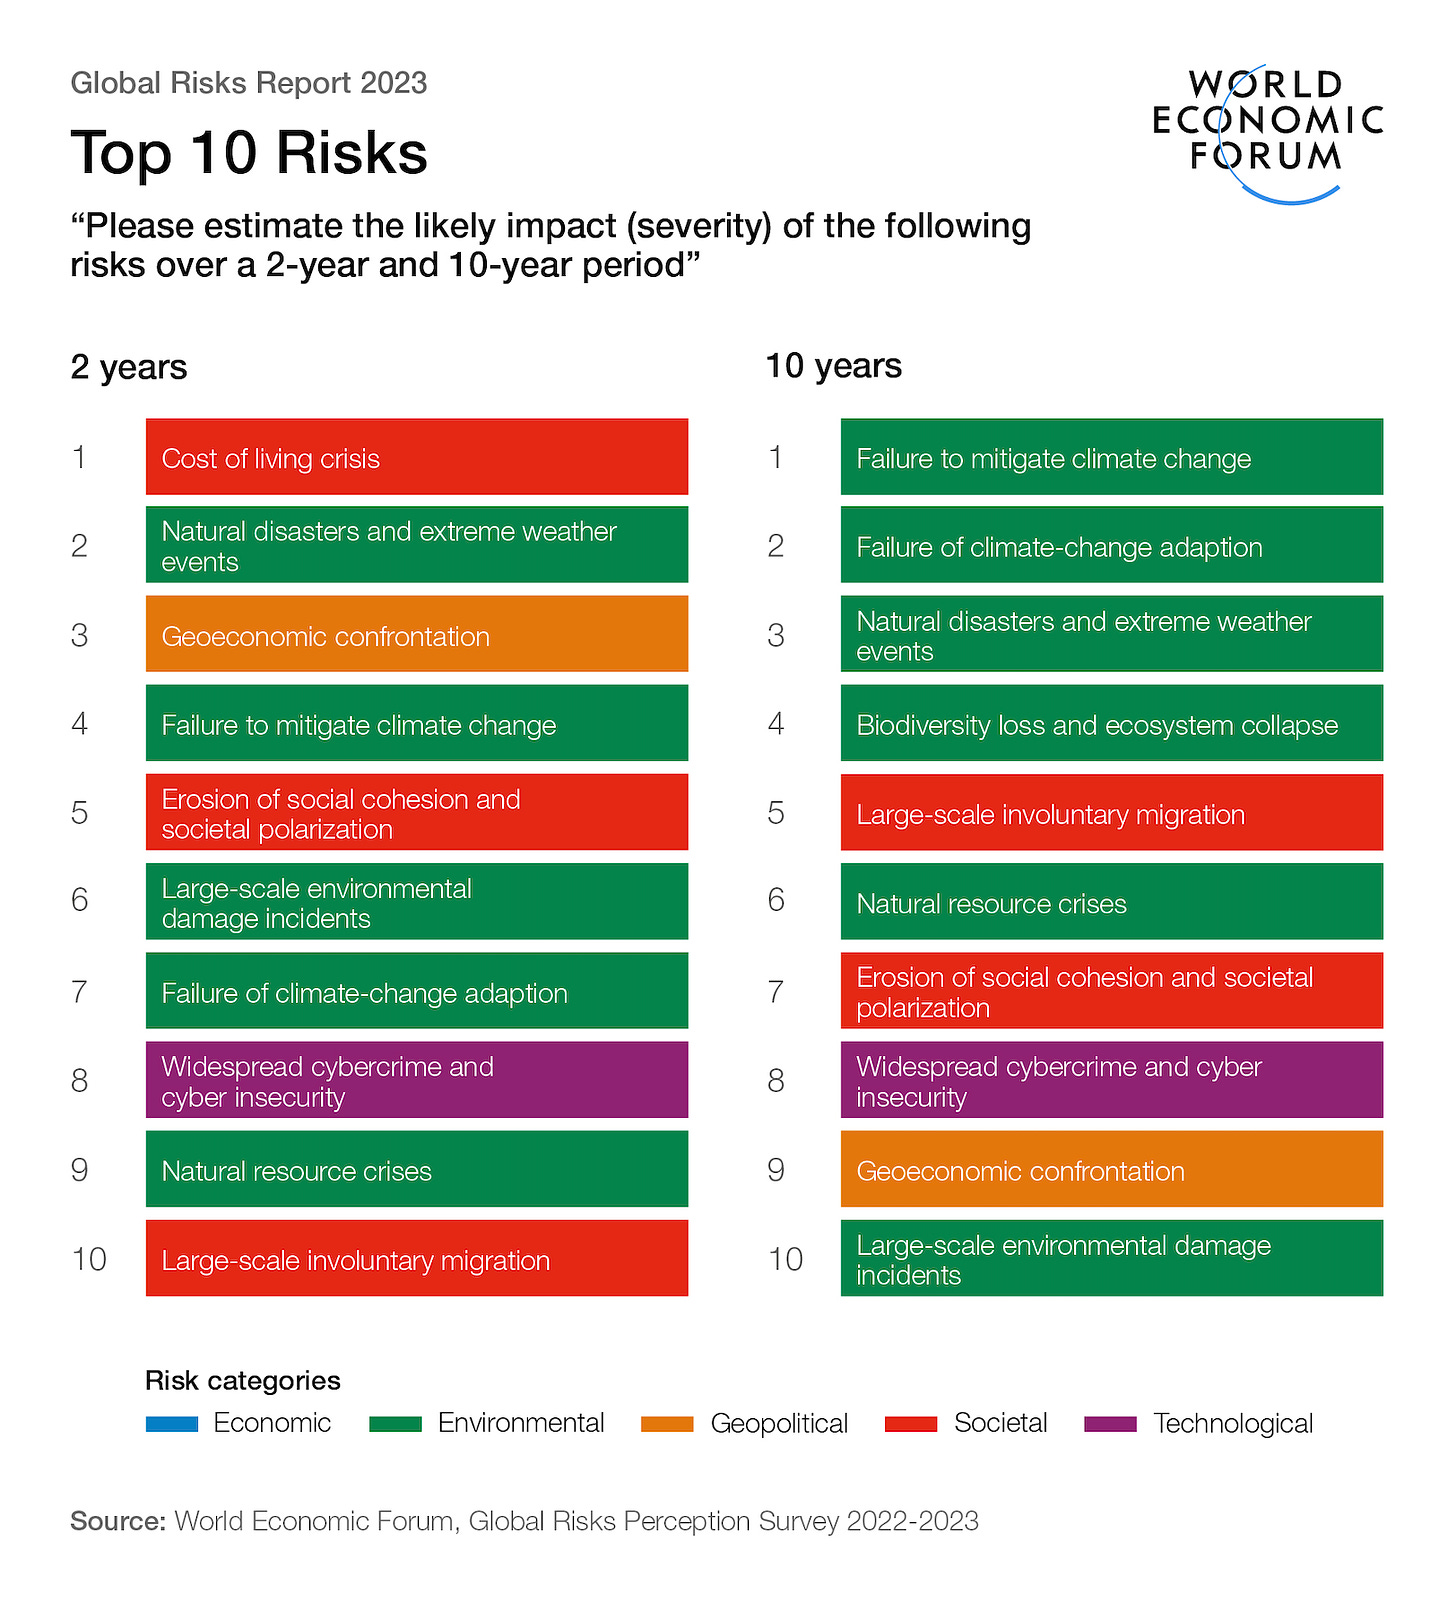 Global Risks Report 2023, Figure A | Global risks ranked by severity over the short and long term